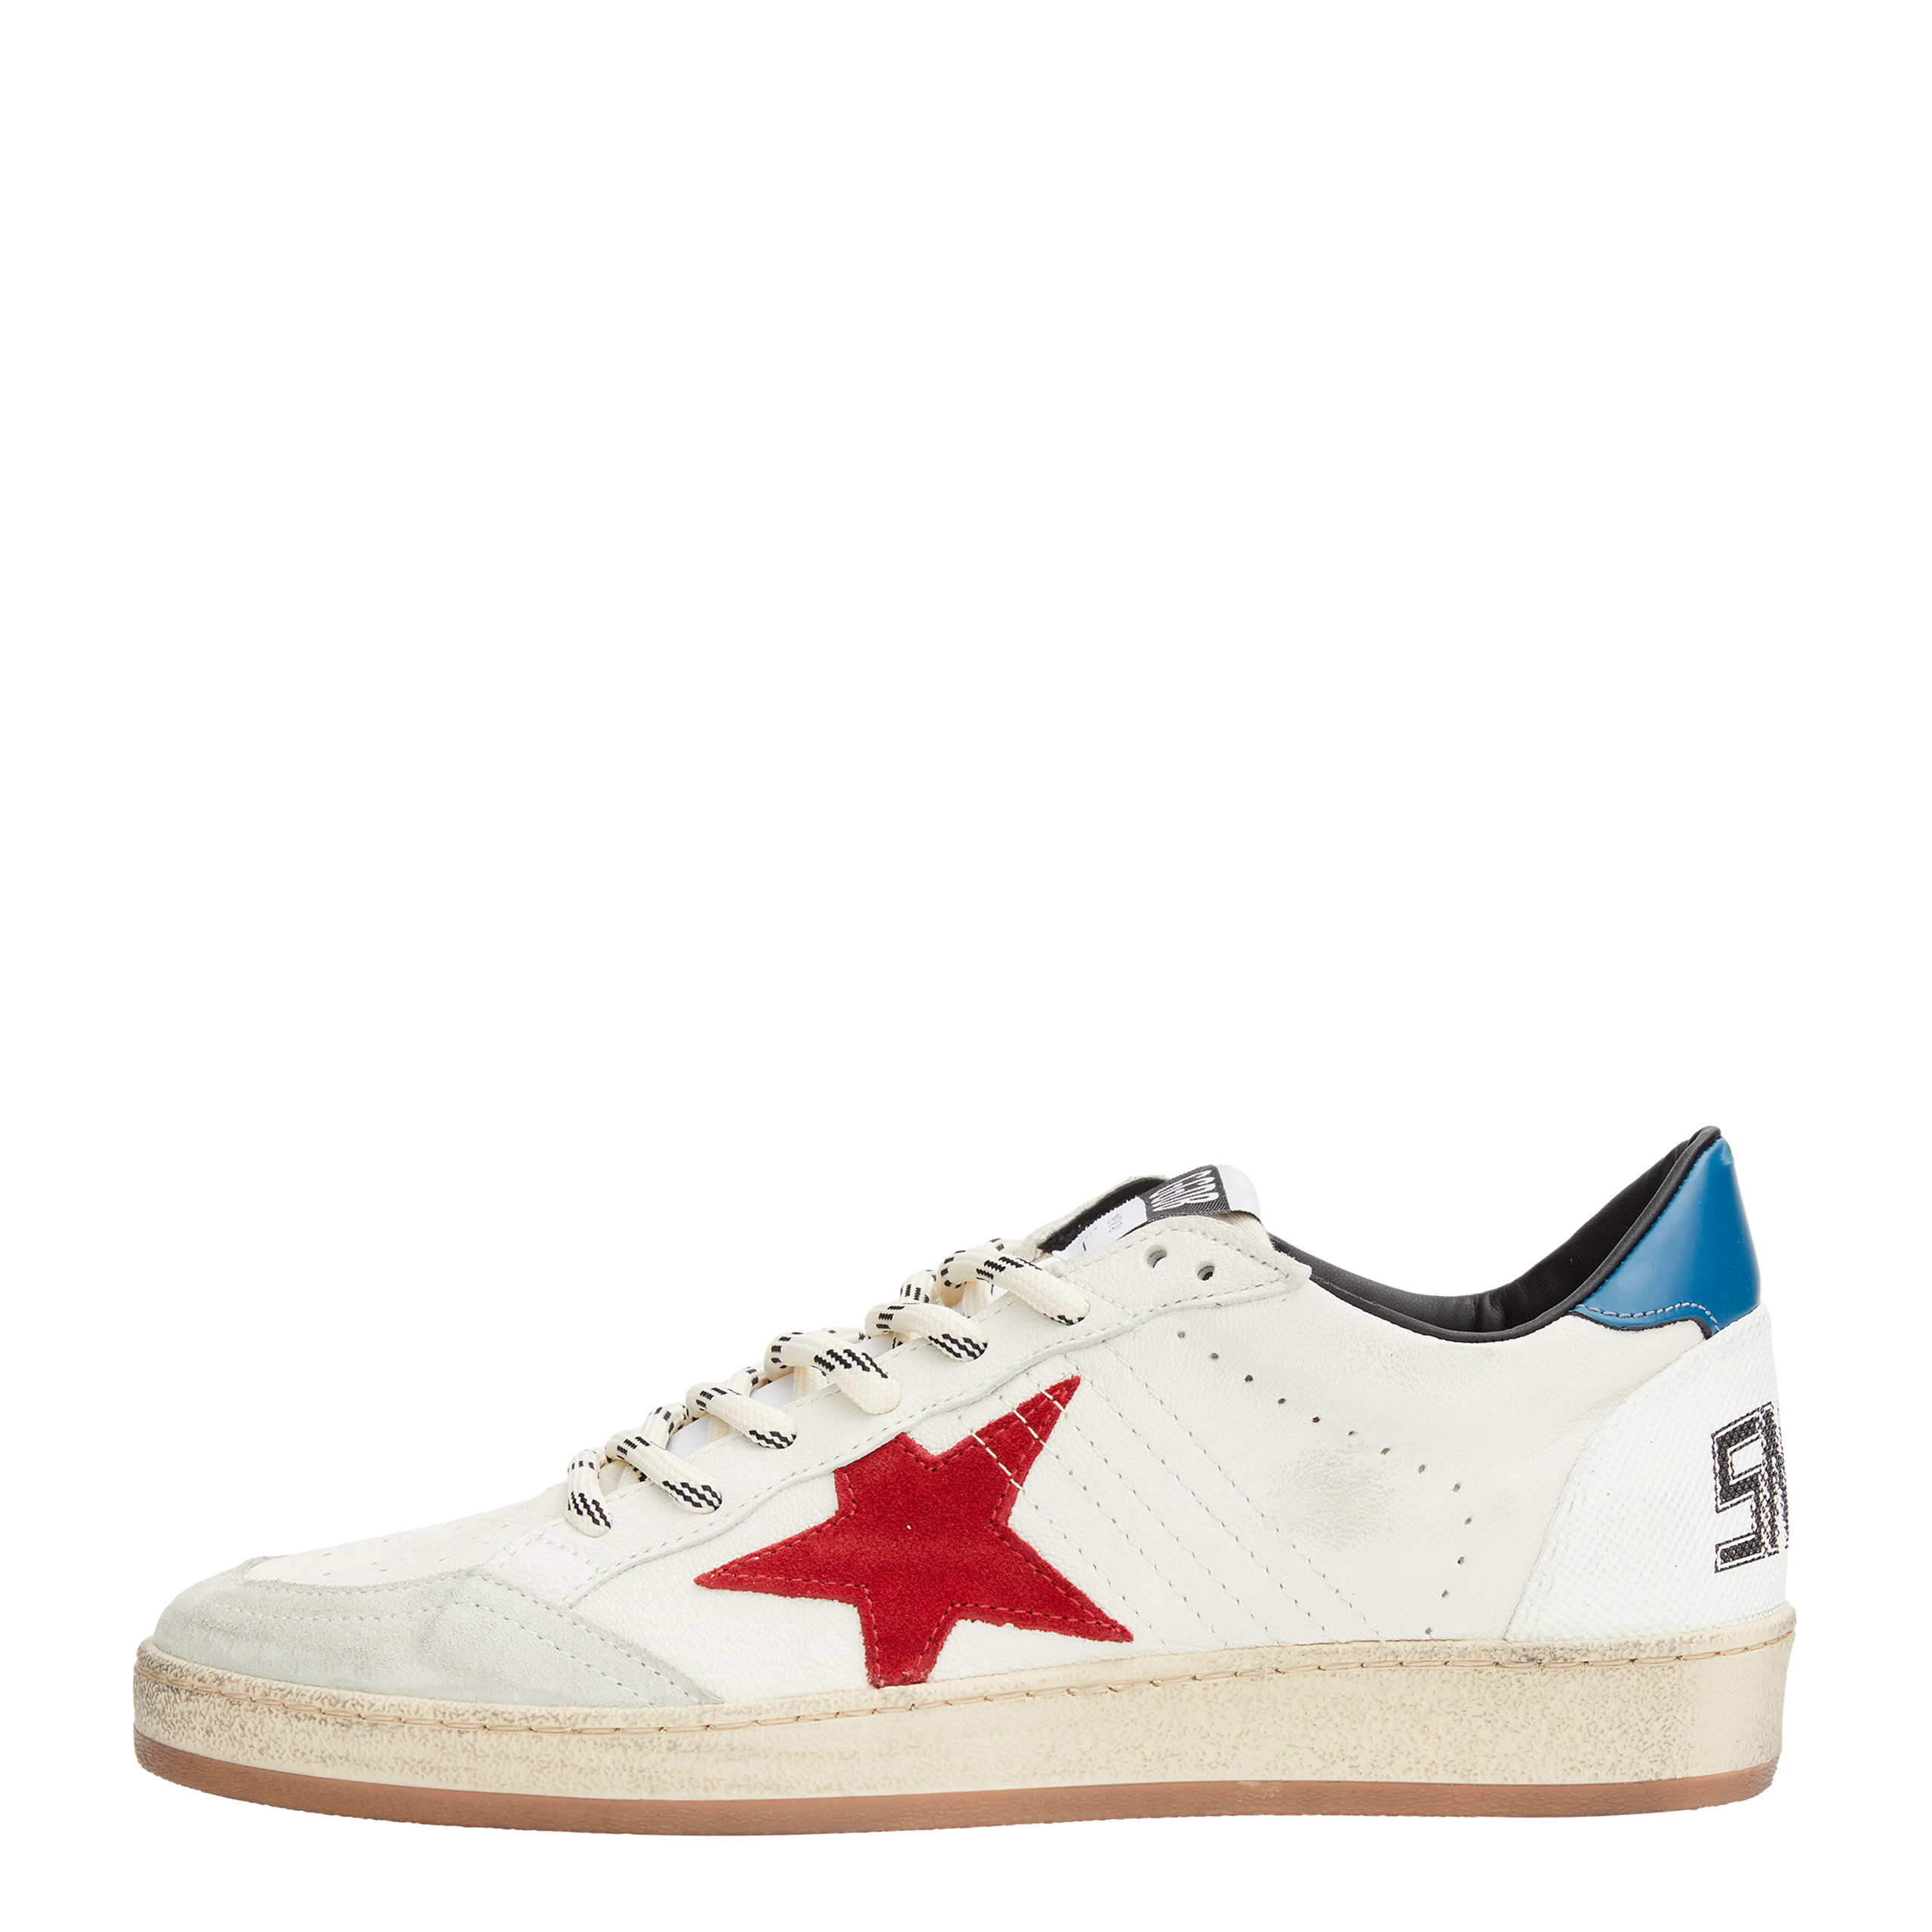 None Golden Goose Deluxe Brand GMF00117/F005403/11716, размер 39;40;41;42;43;44;45;46 GMF00117/F005403/11716 - фото 3